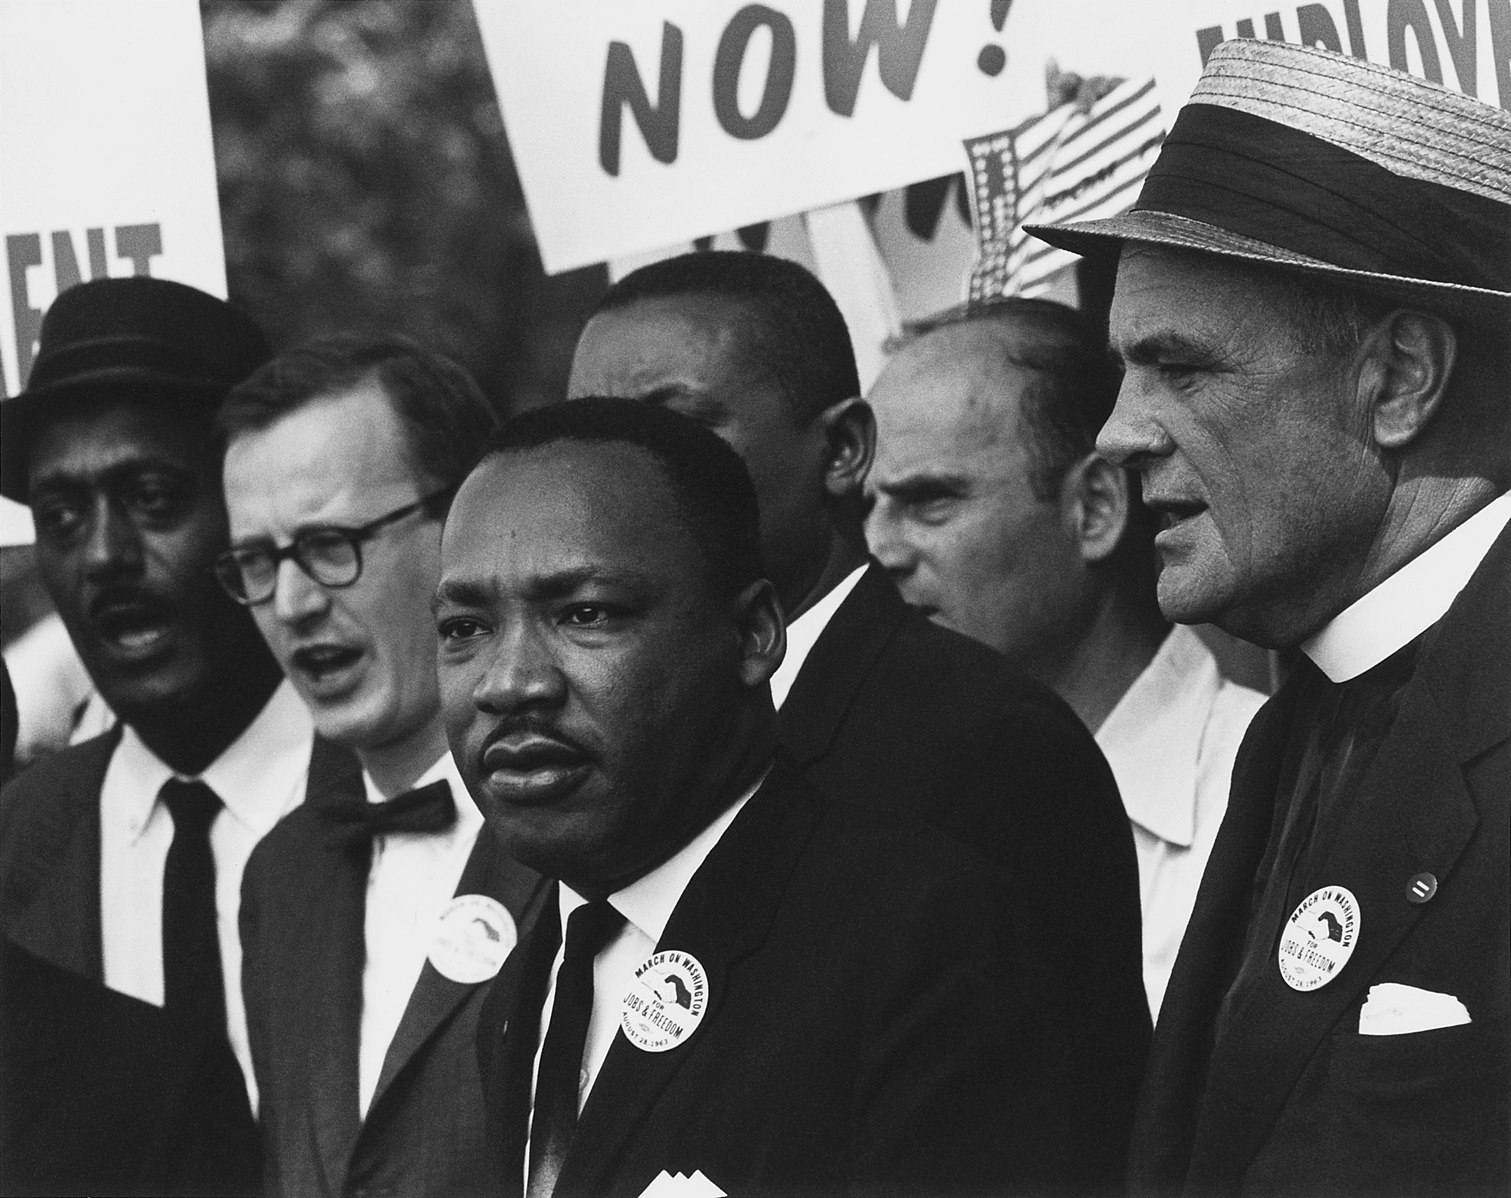 Martin Luther King Jr. during the 1963 March on Washington for Jobs and Freedom, during which he delivered his historic "I Have a Dream" speech, calling for an end to racism.